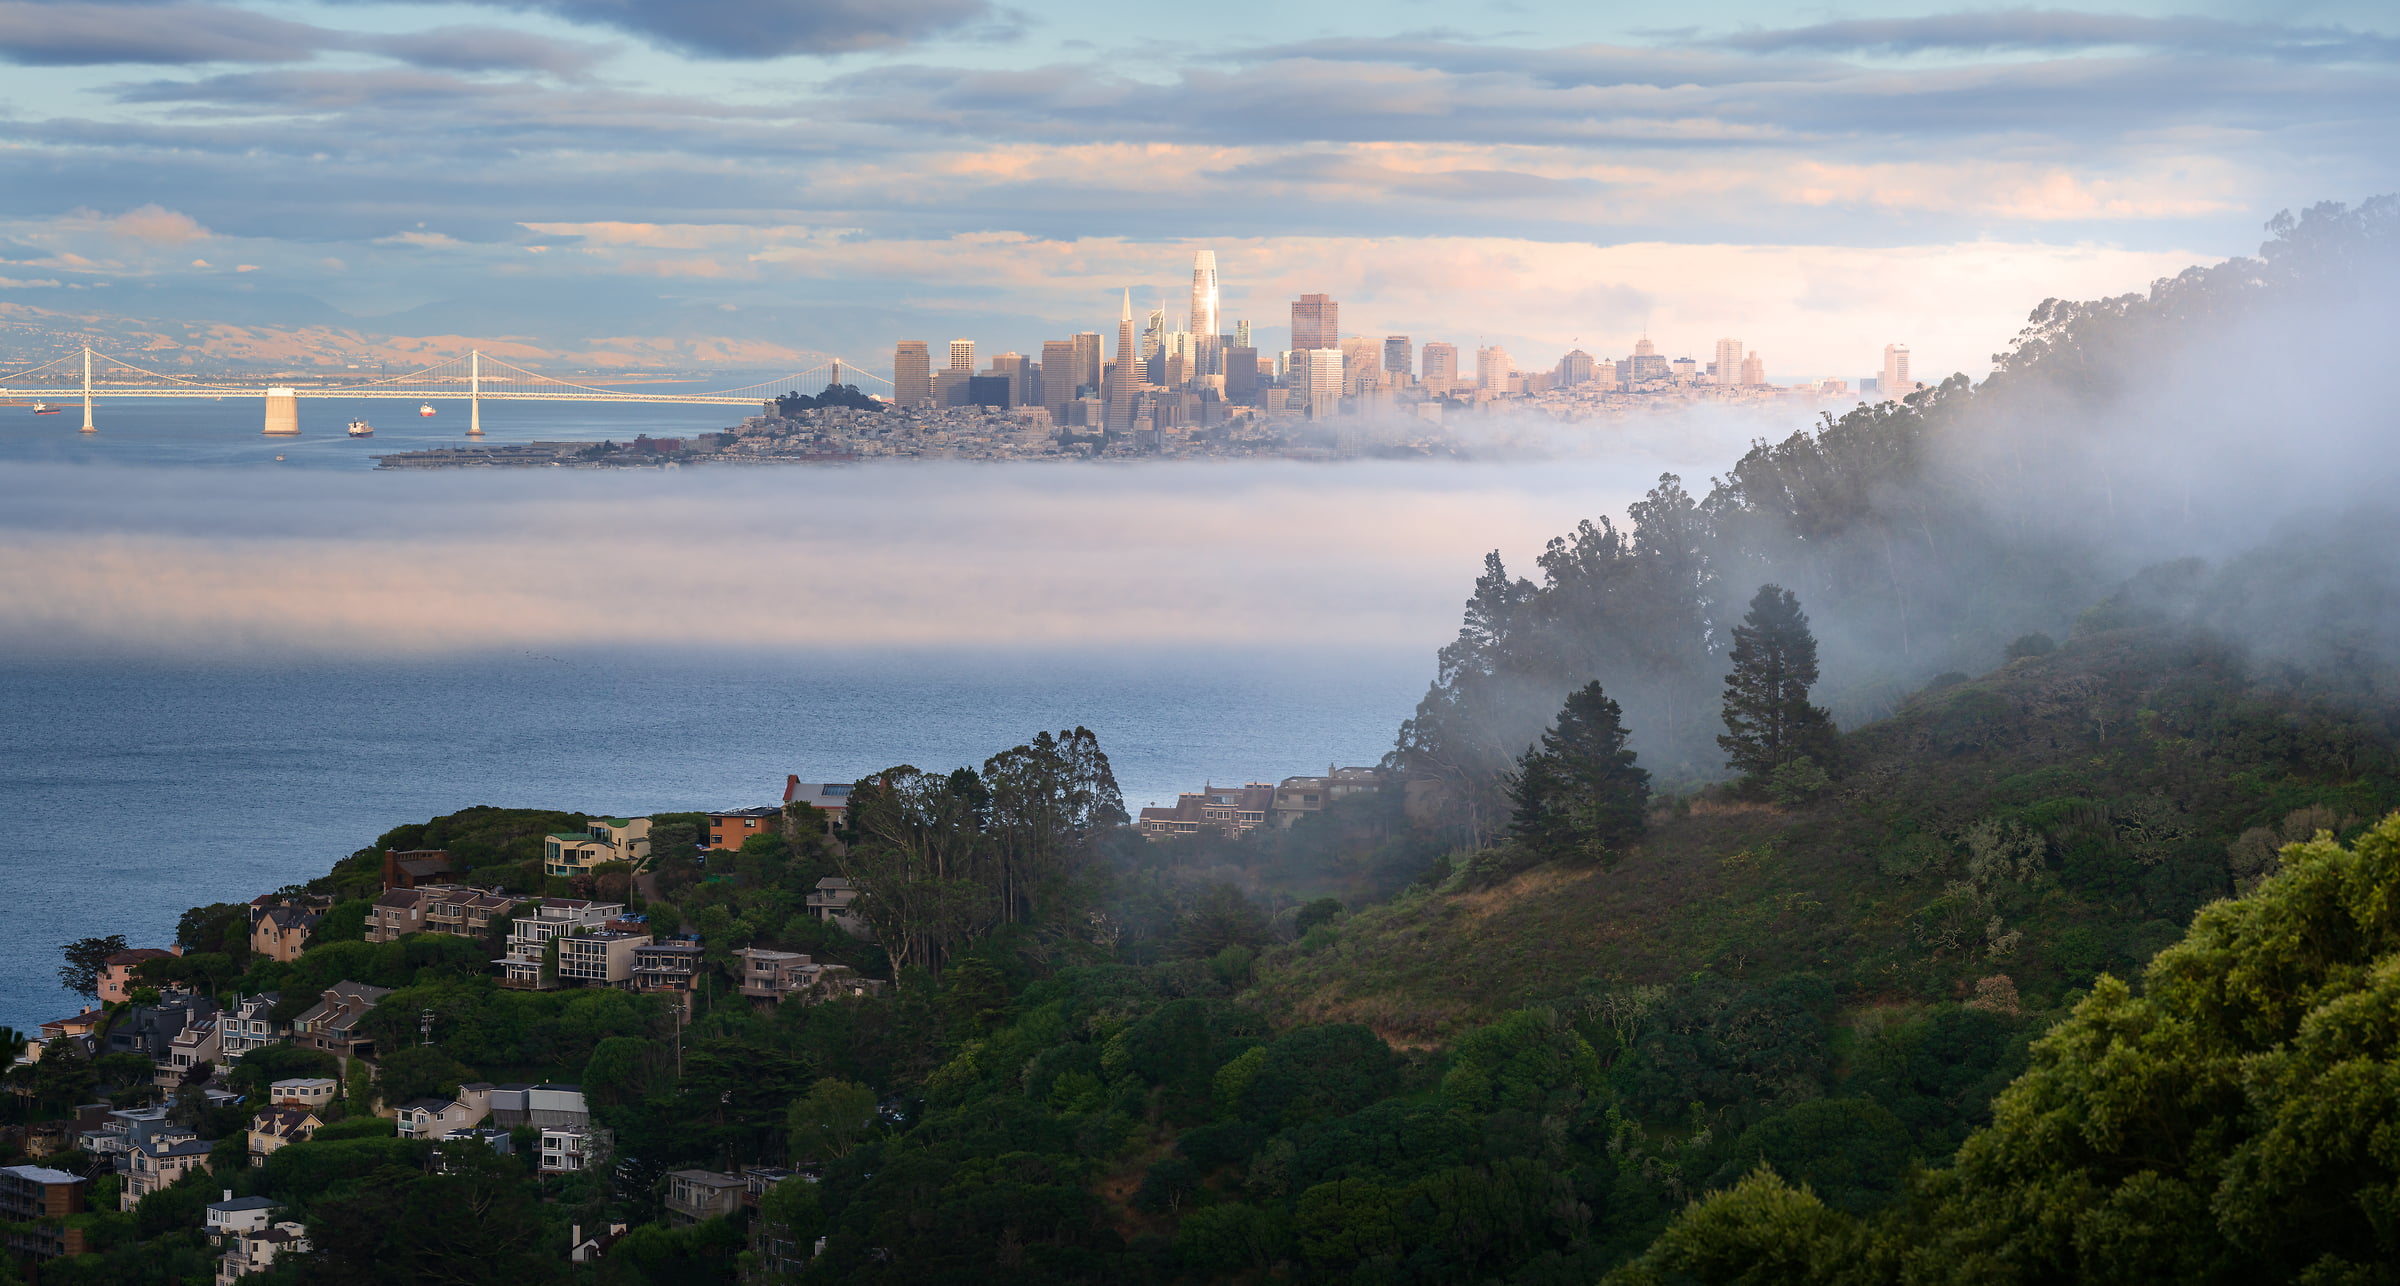 199 megapixels! A very high resolution, large-format VAST photo print of San Francisco and Sausalito at evening with fog; landscape and cityscape photograph created by Jeff Lewis in Sausalito, California.